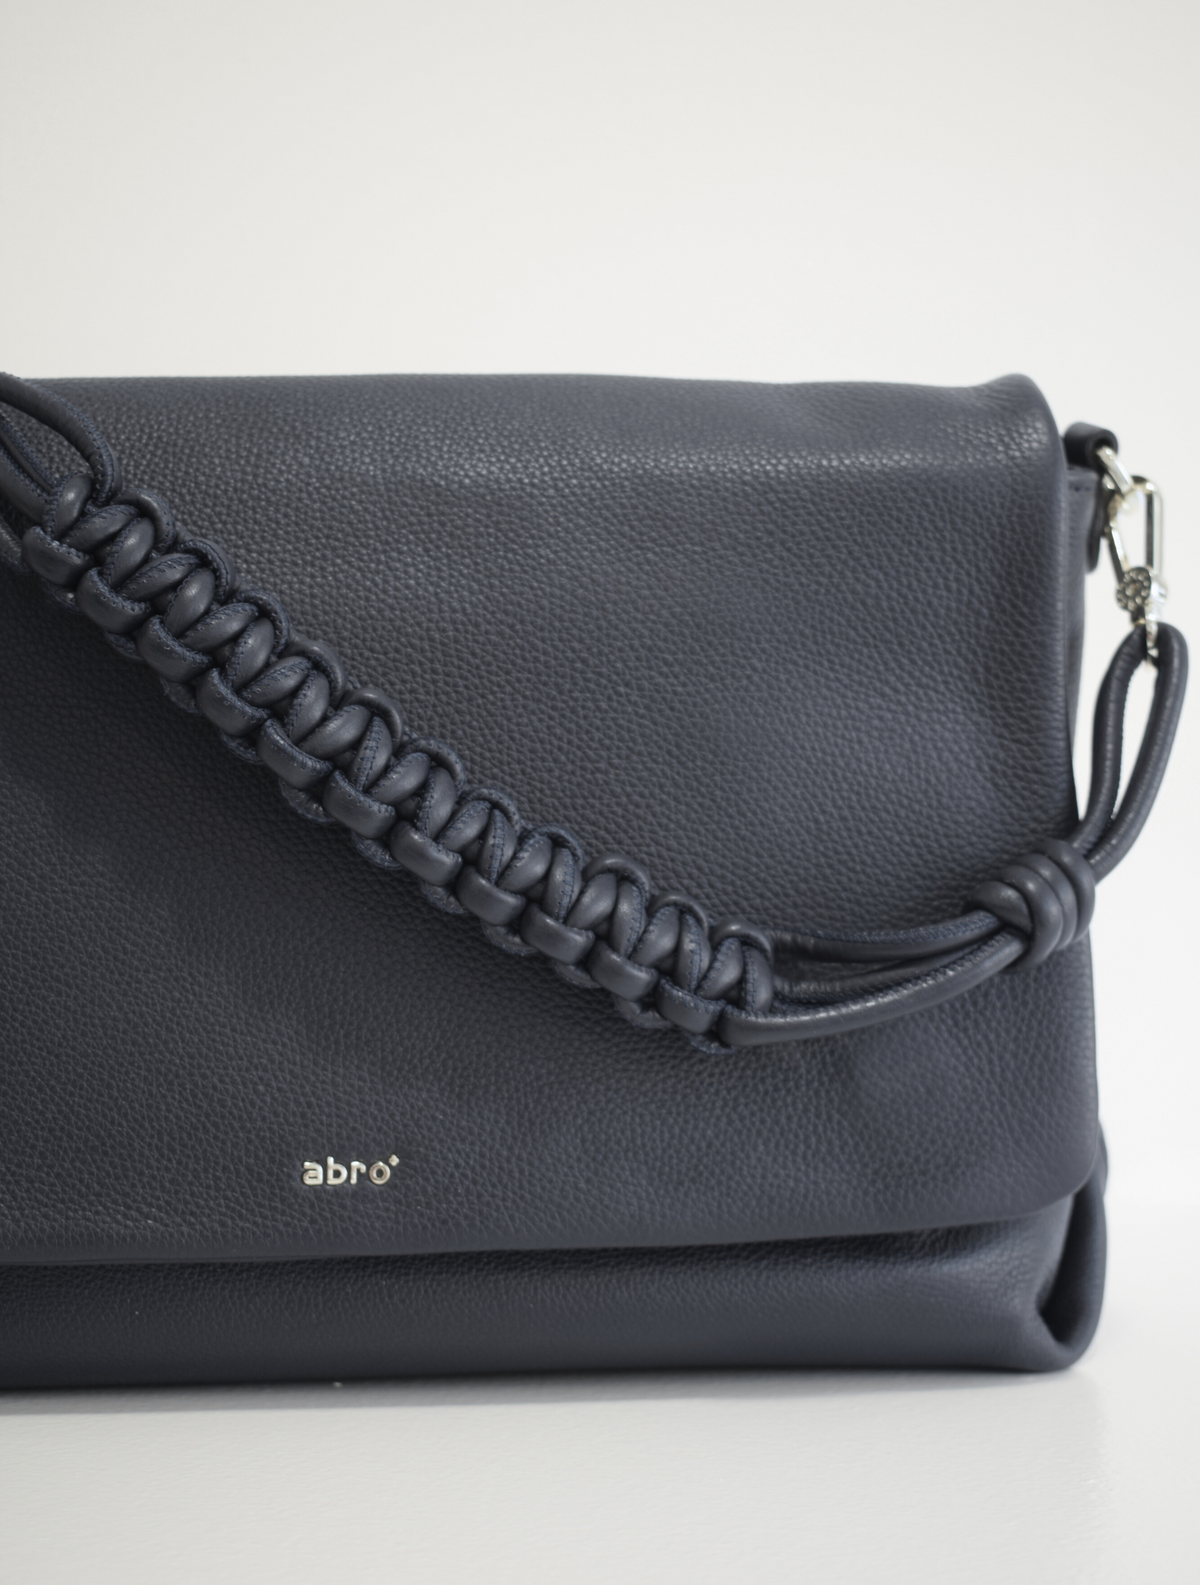 Navy leather bag 